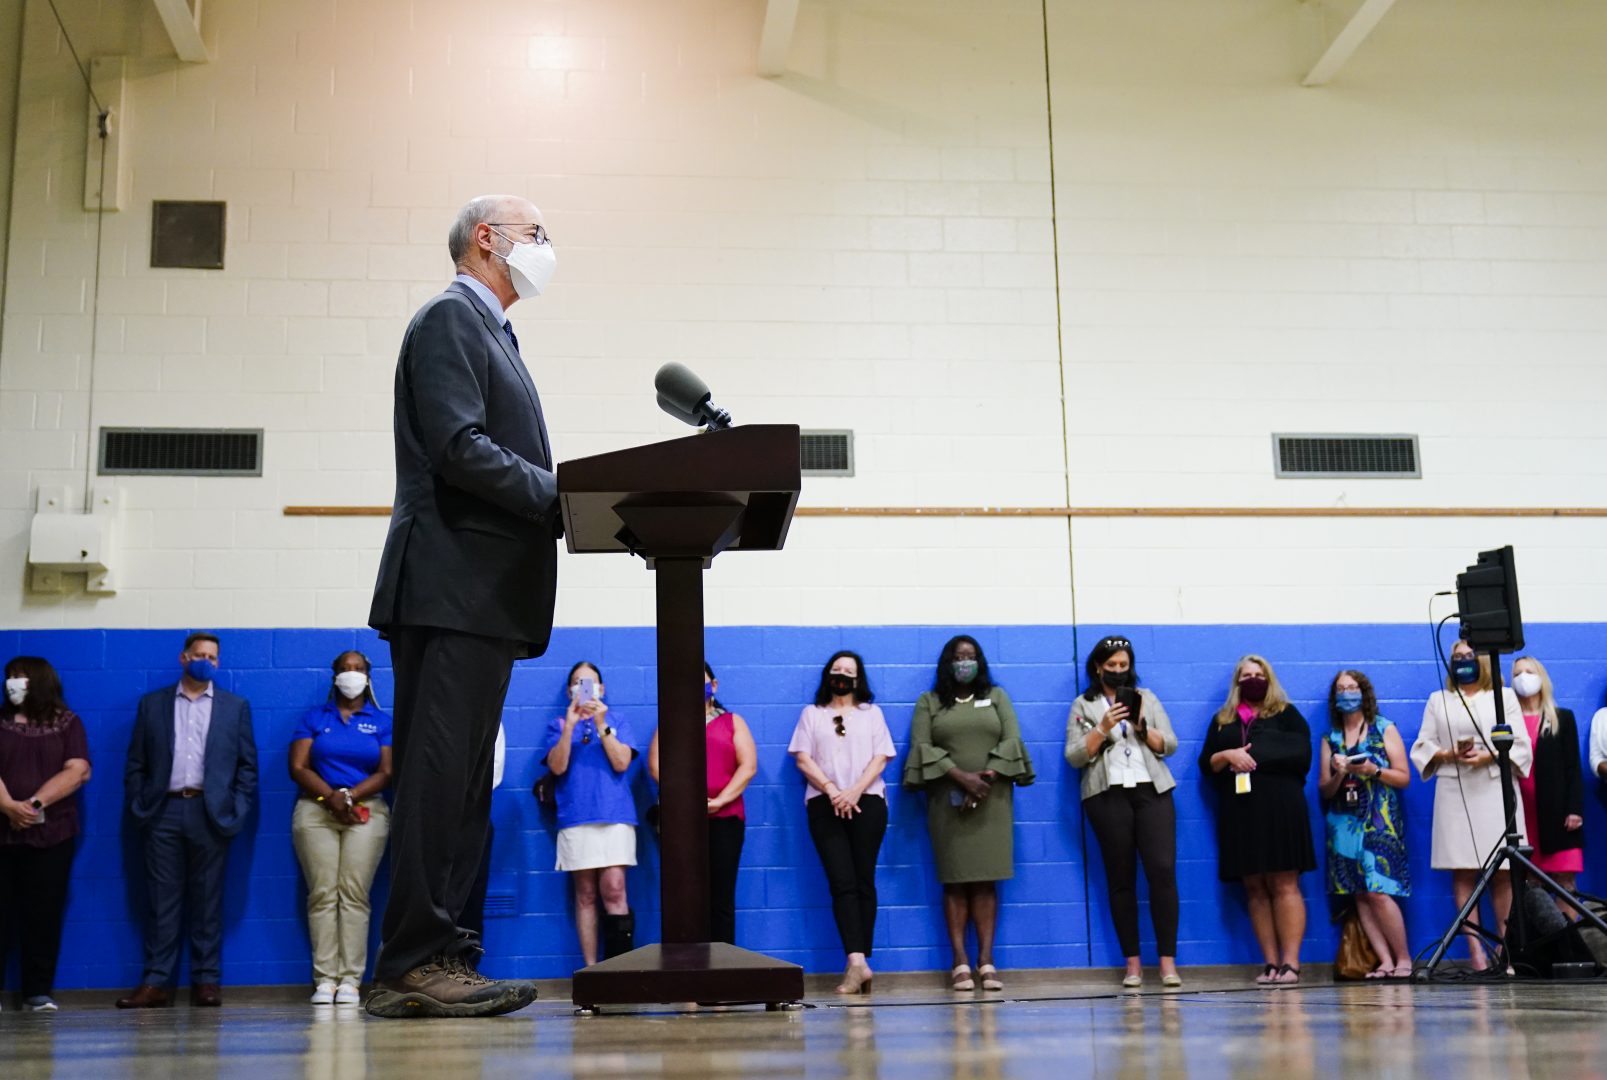 Gov. Tom Wolf speaks at Hancock Elementary School in Norristown, Pa., Wednesday, Sept. 8, 2021. A statewide mask mandate for Pennsylvania schools went into effect Tuesday with some school districts in open defiance of the Wolf administration, while GOP leaders in the state House planned to come back to Harrisburg early to mount a legislative response.